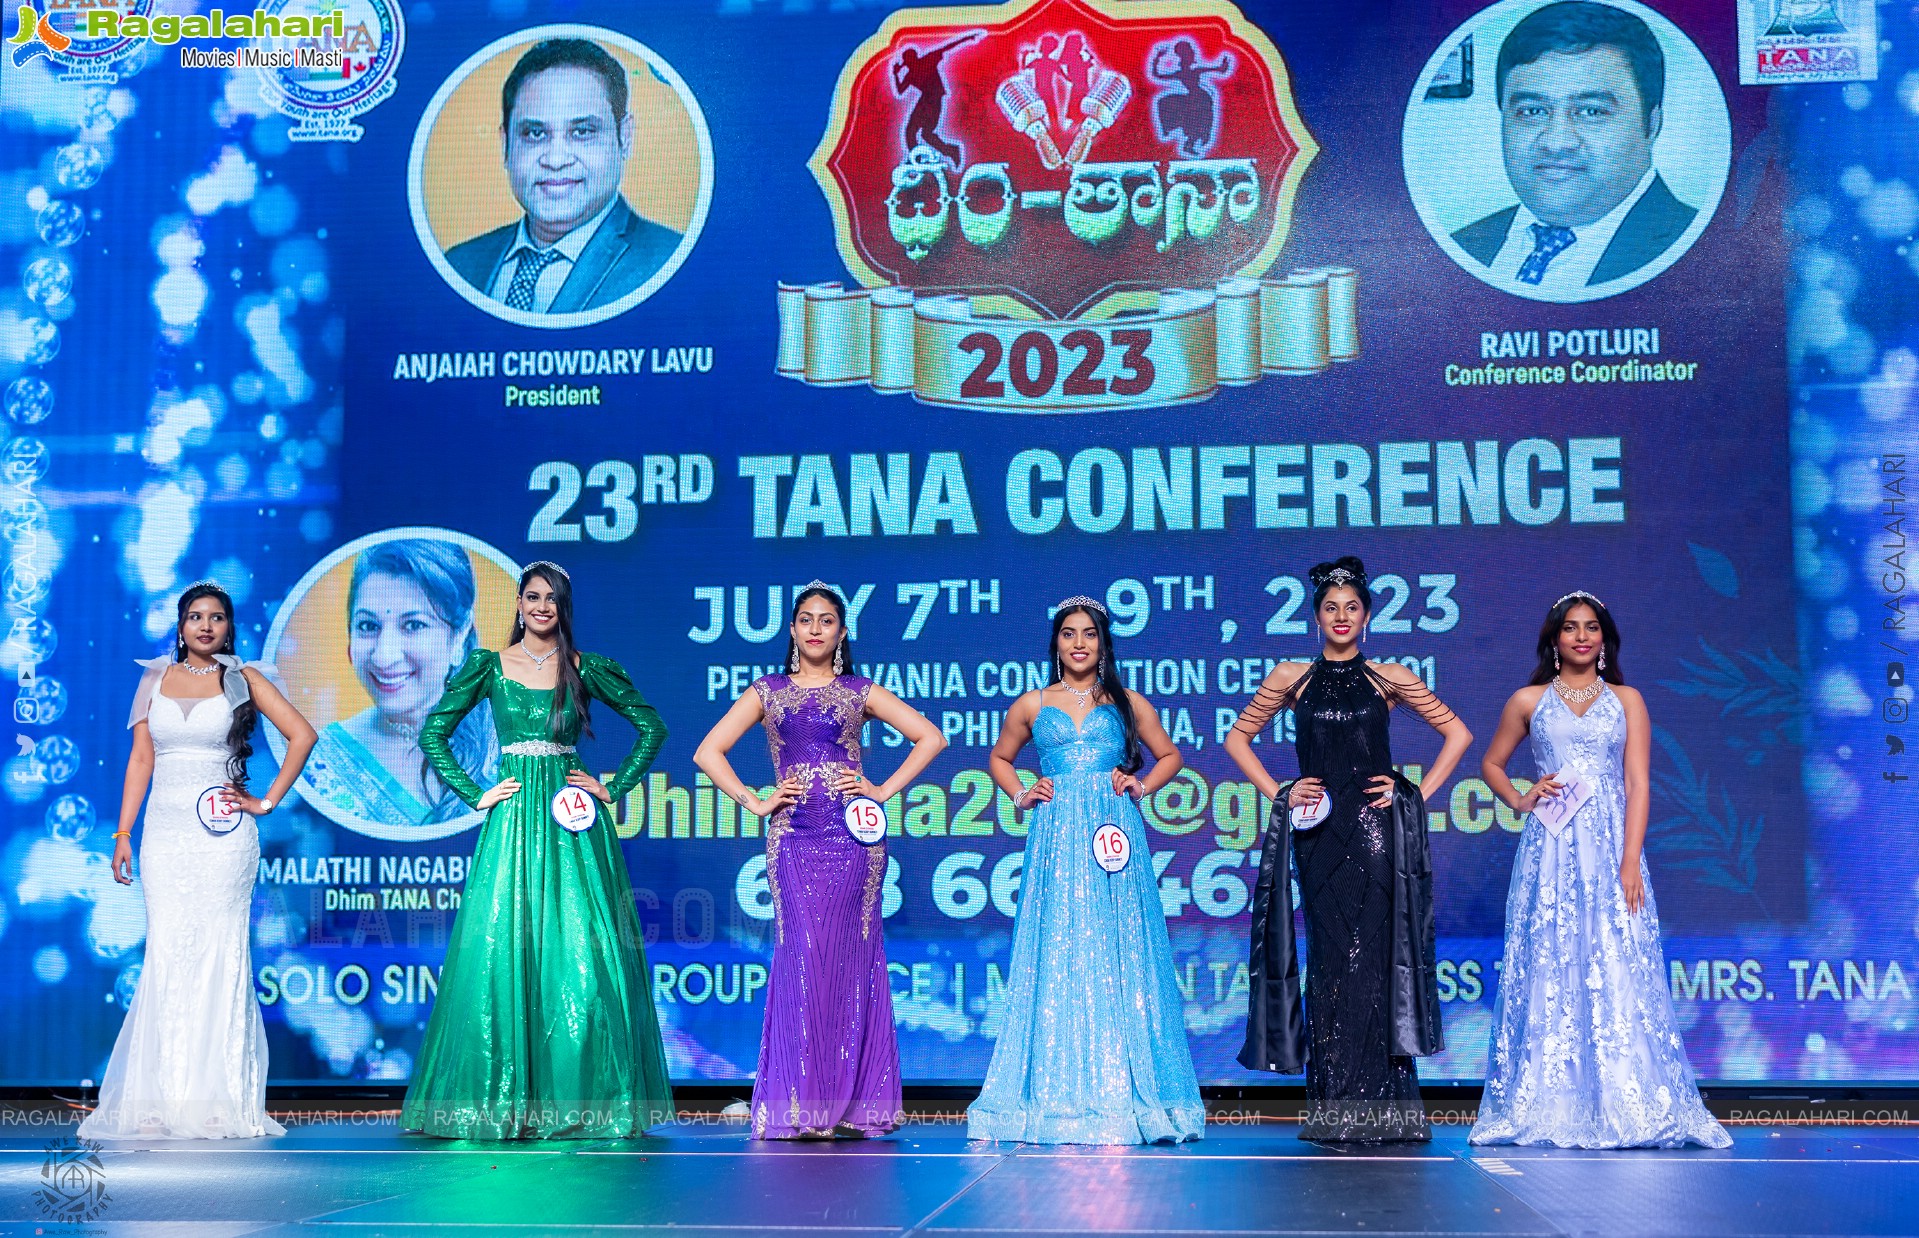 DhimTANA final competitions at 23rd TANA Conference, Philadelphia